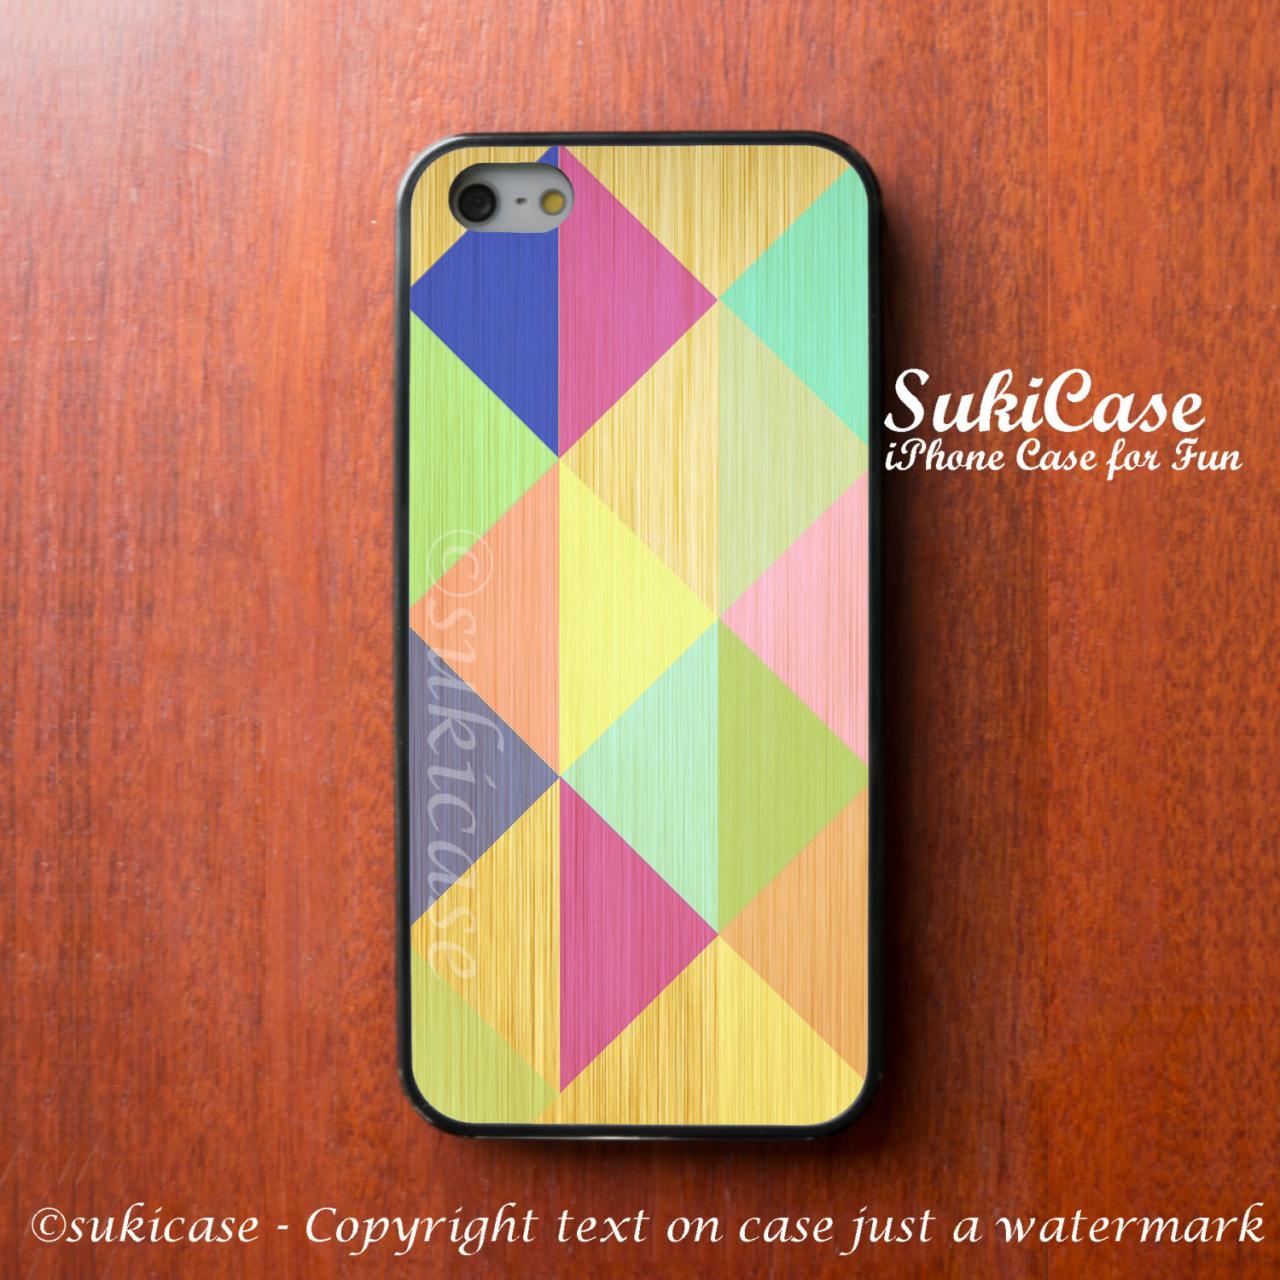 Iphone 5 Case Geometric Bright Colorful Wooden Iphone Case Iphone 5 Case Iphone 4 Case Samsung Galaxy S4 S3 Cover Iphone 5c Iphone 4s Cases